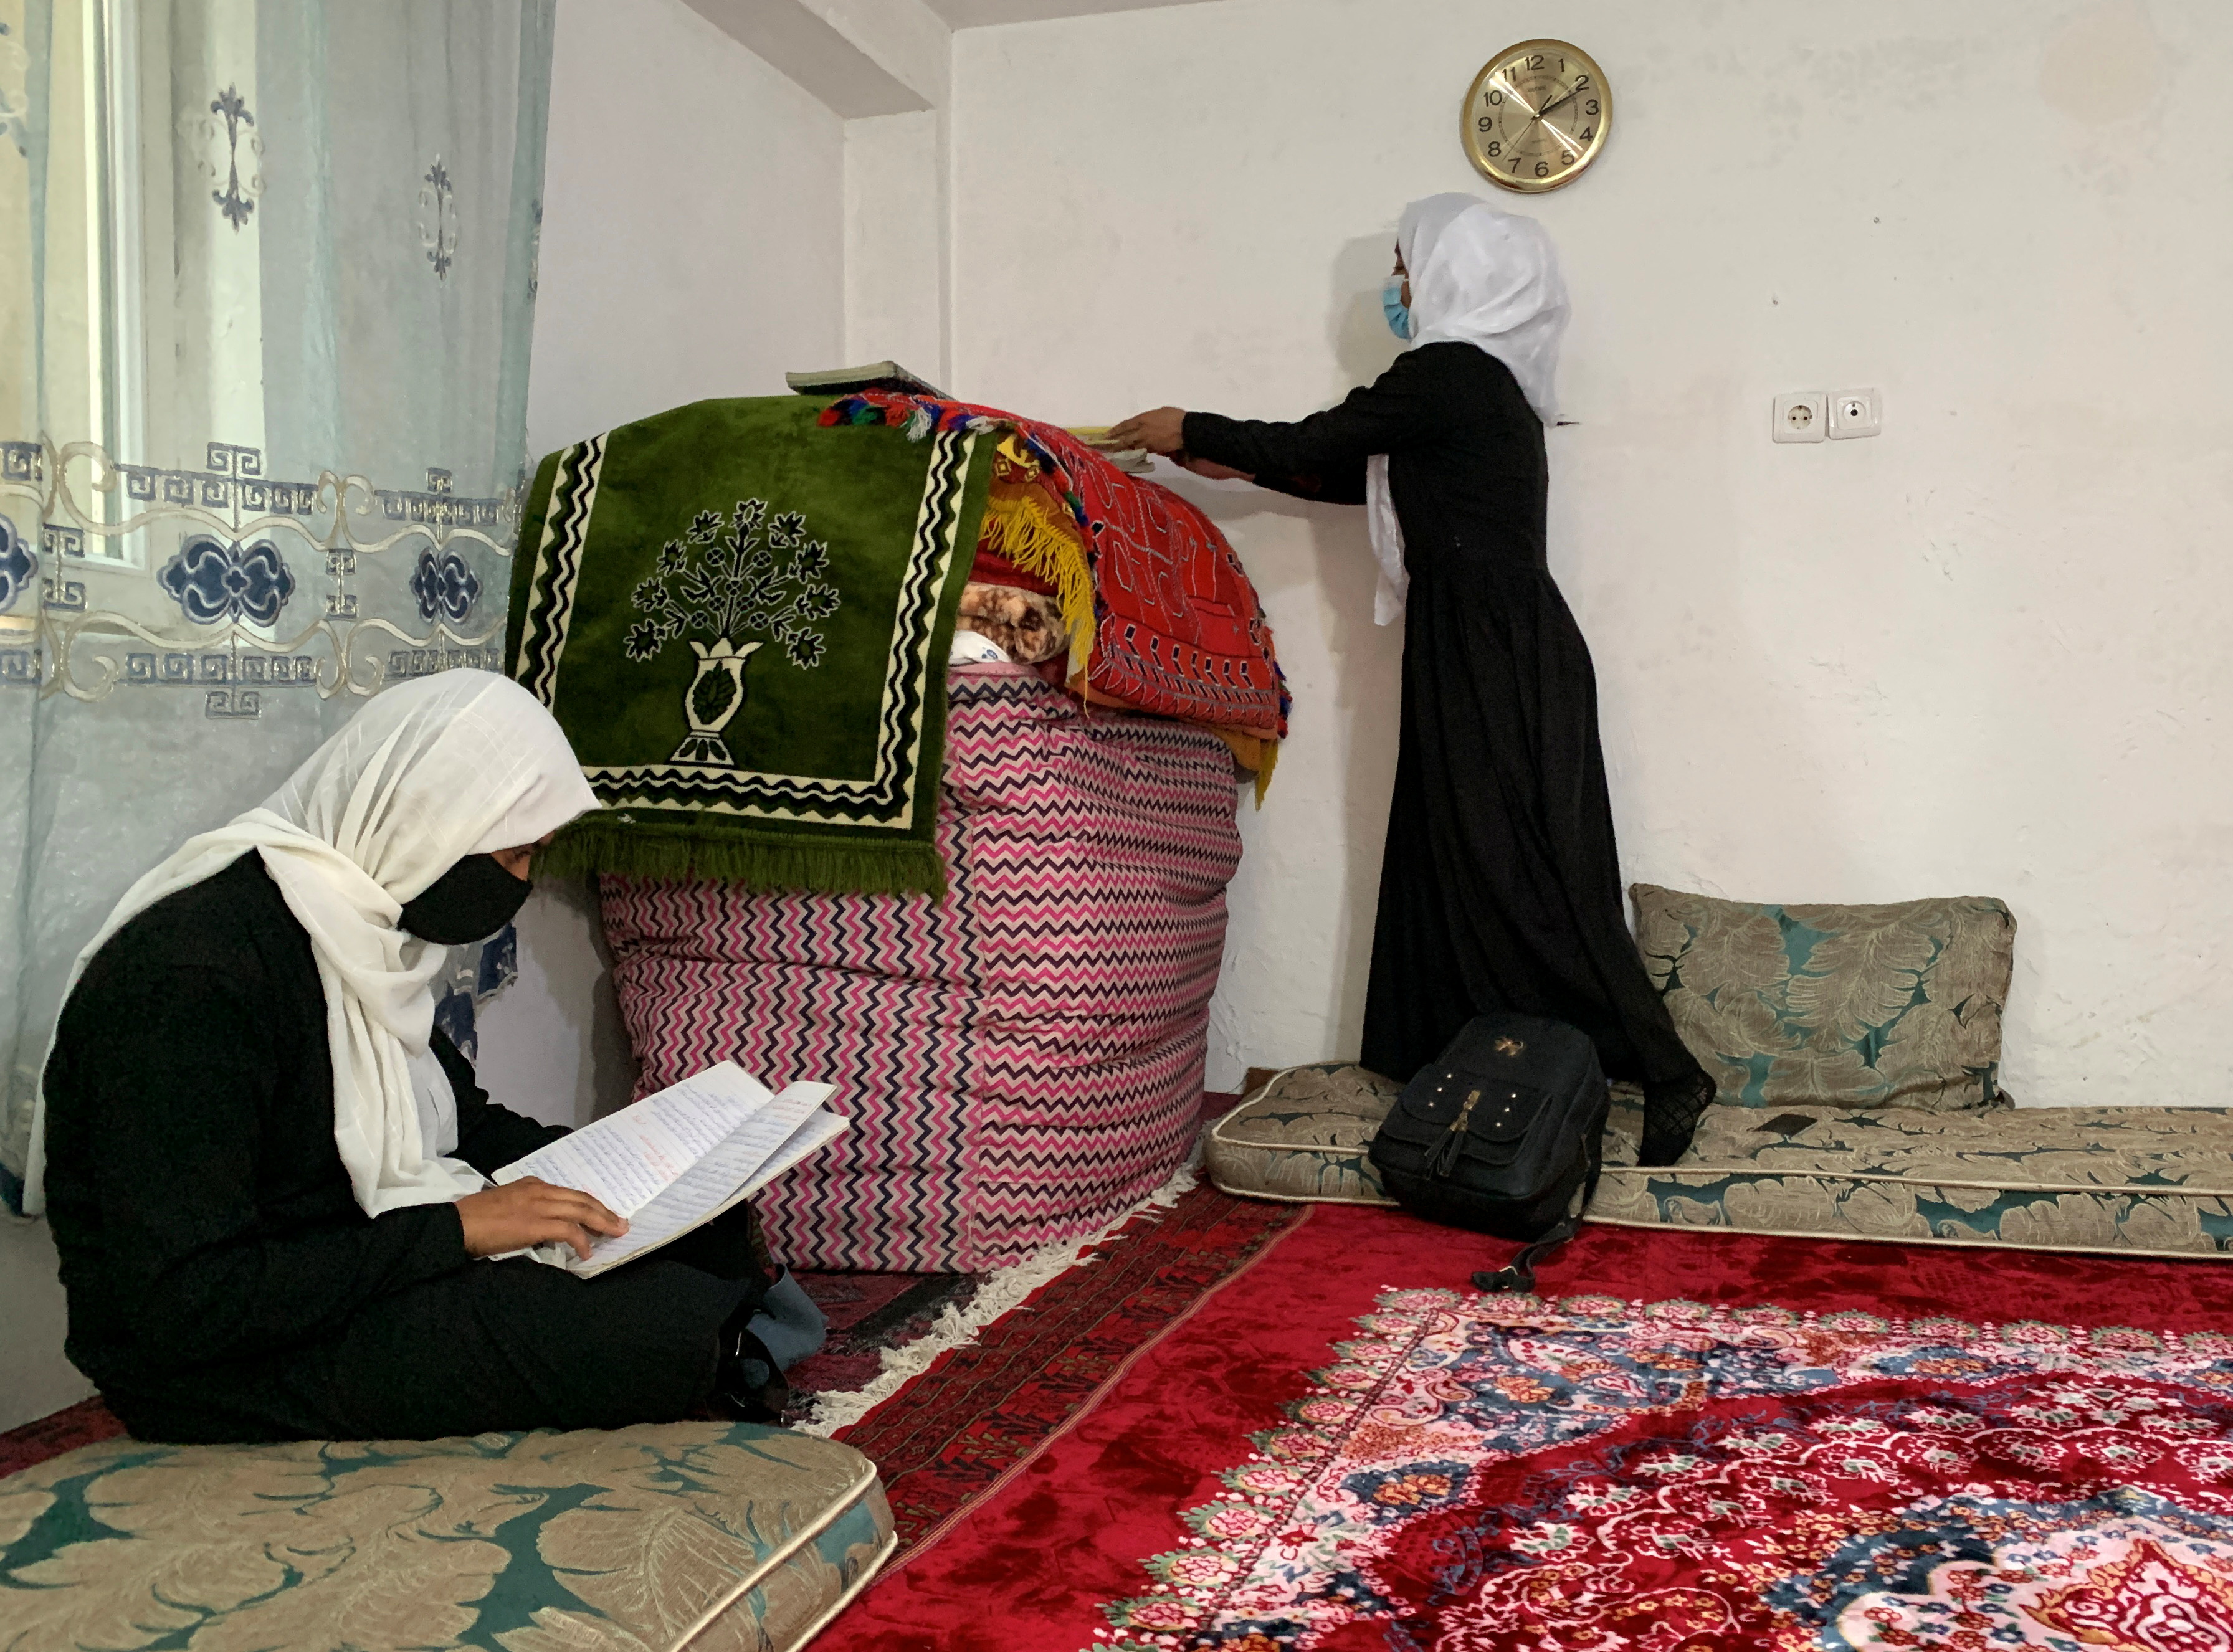 An Afghan schoolgirl reads from her notebook as another unpacks her school bag inside a house in Kabul